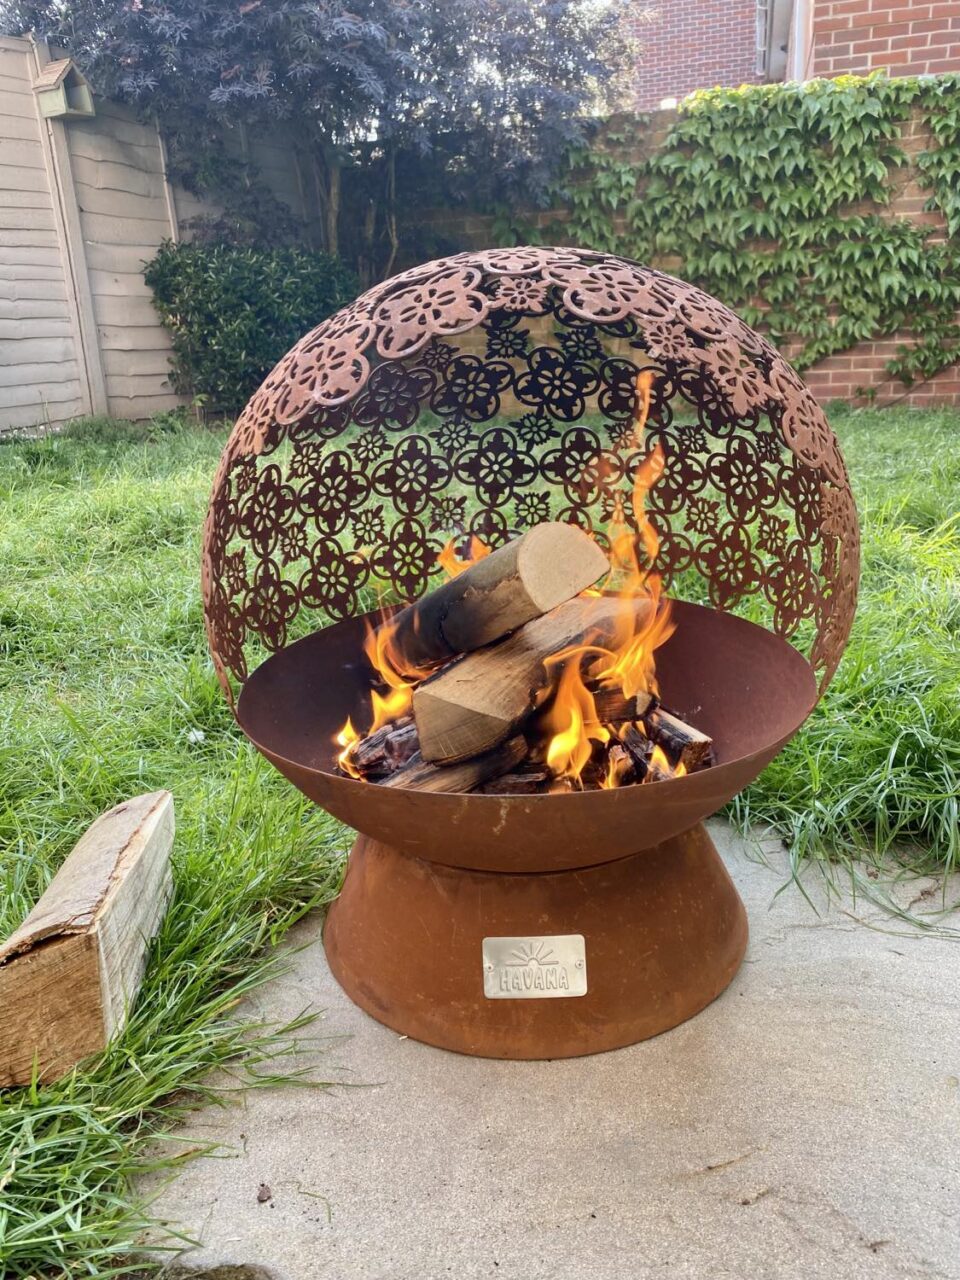 a firepit in use